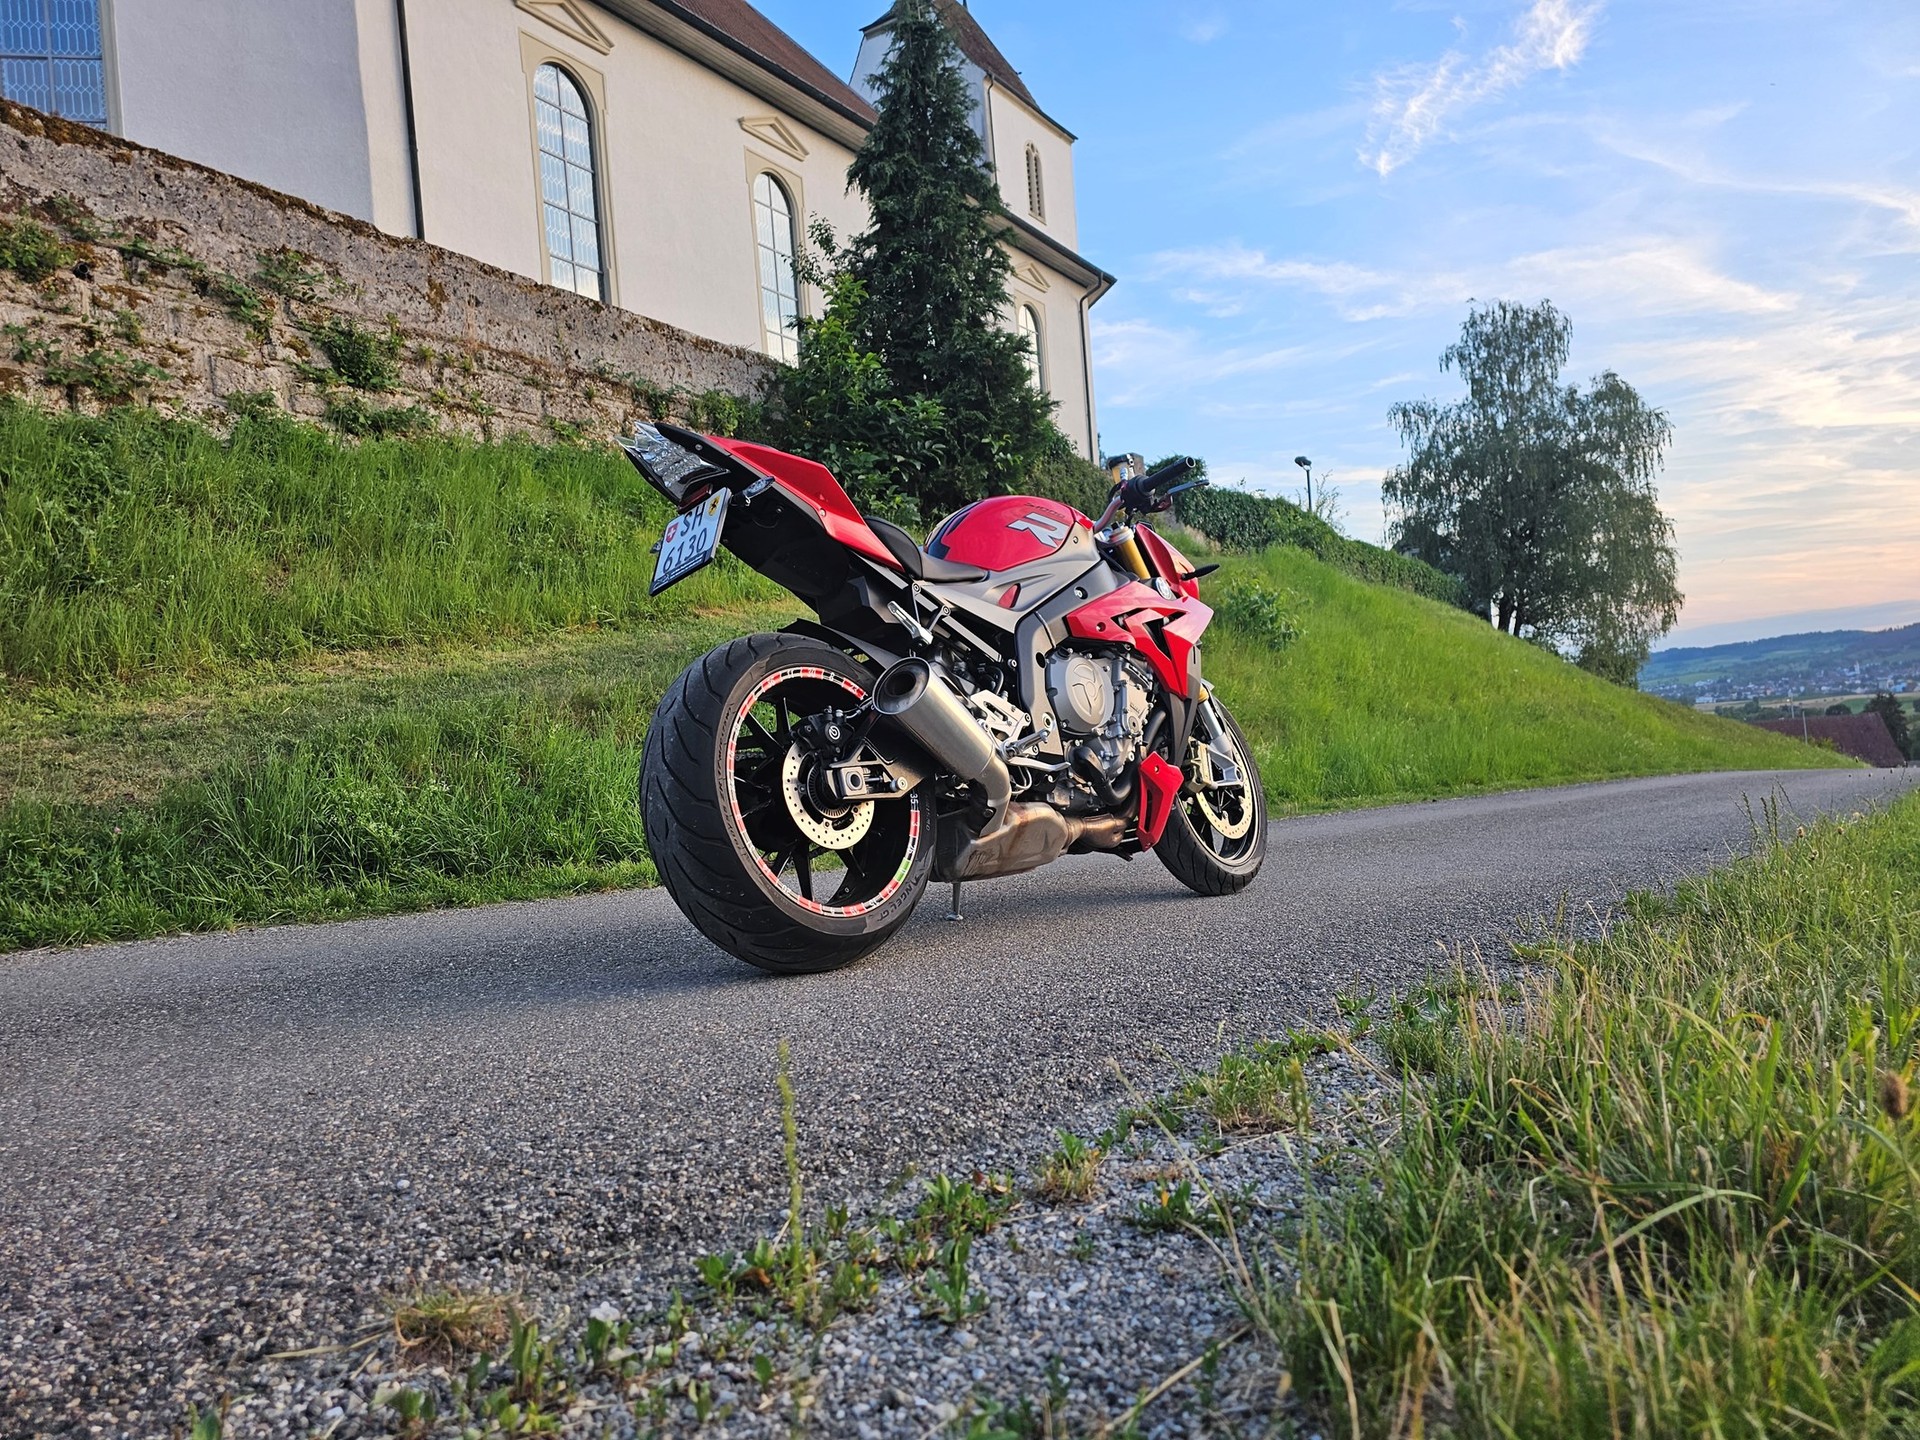 BMW S 1000 R ABS